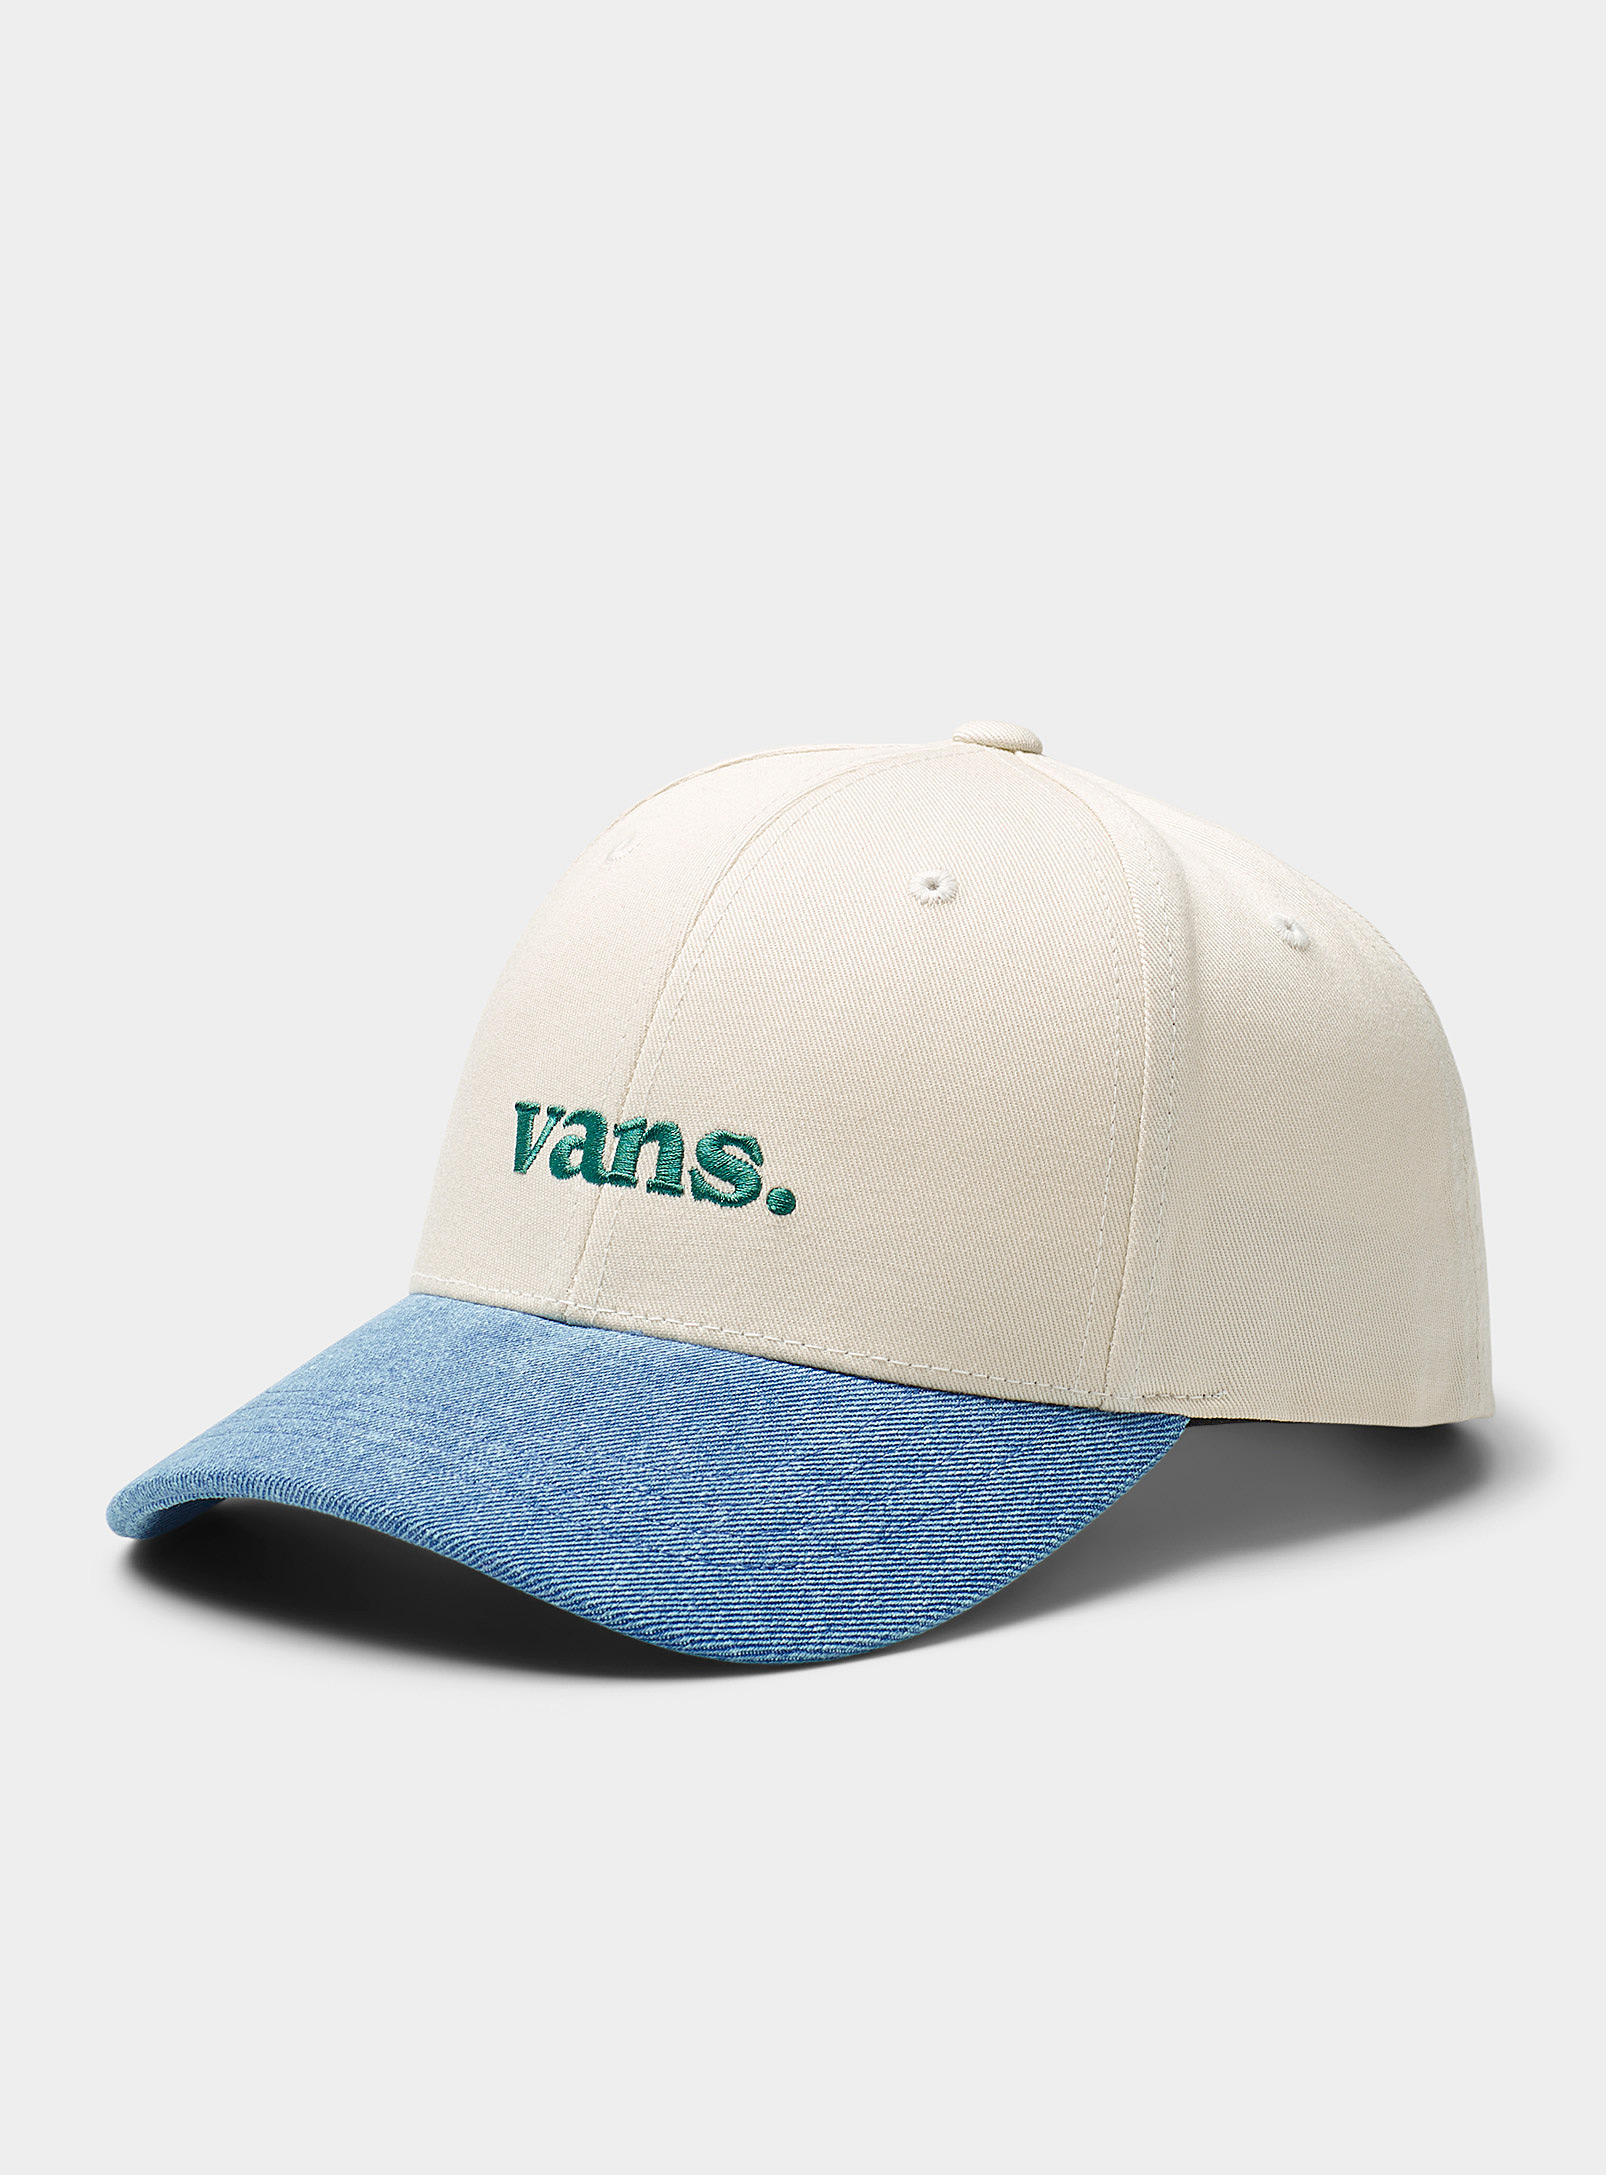 Vans Embroidered Typography Logo Cap In Multi